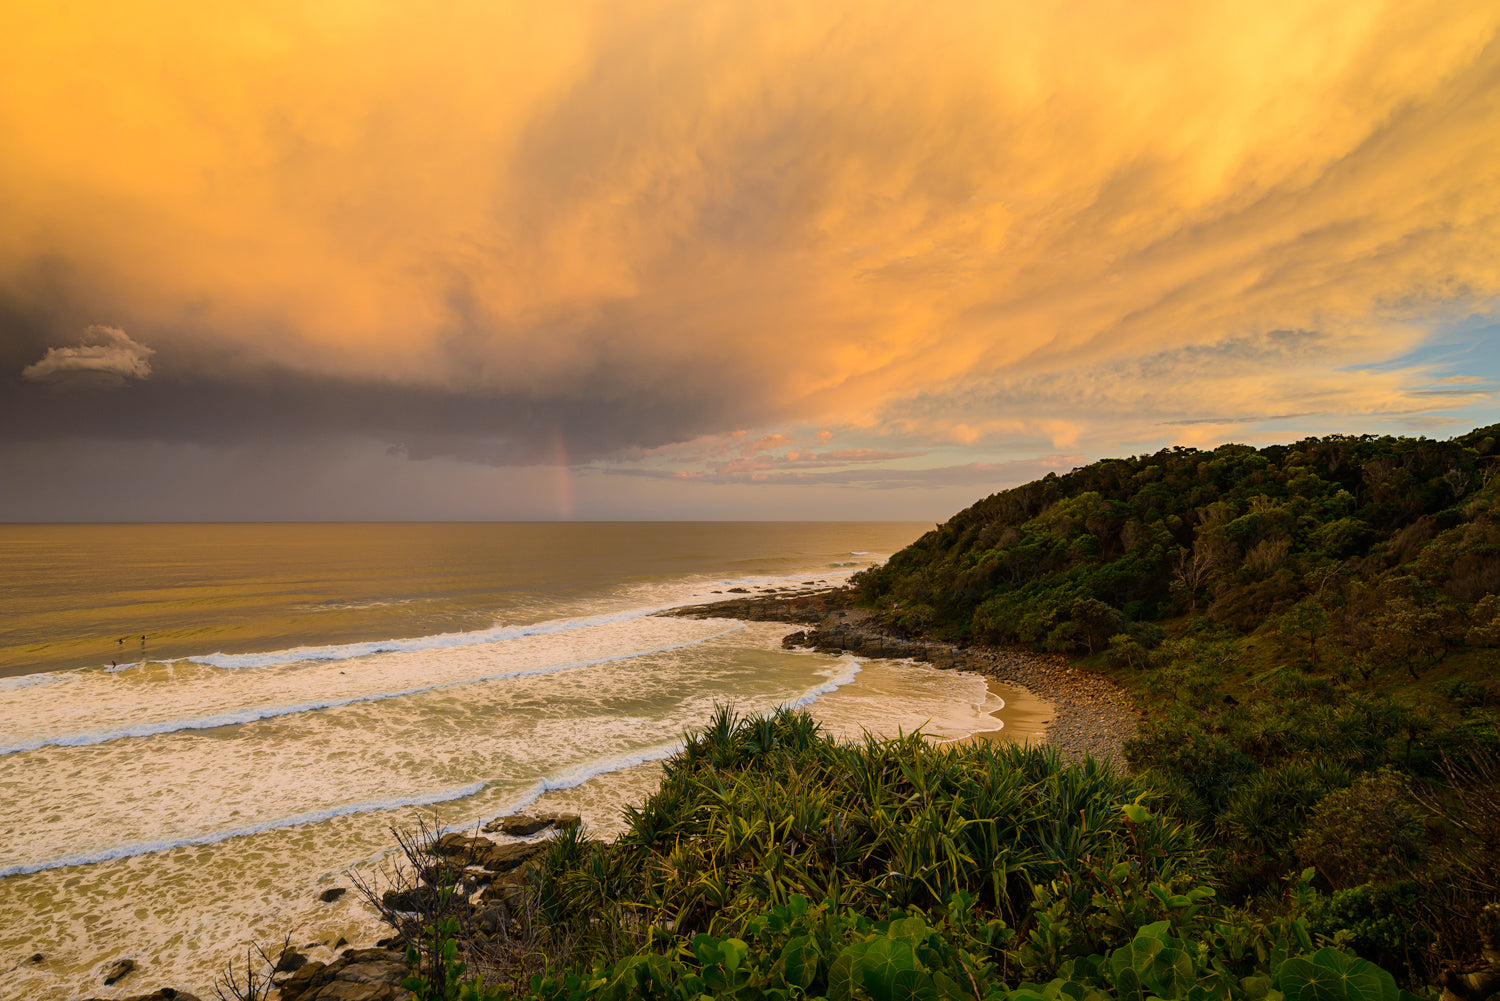 After the storm -Coolum Beach - Dave Wilcock Photography